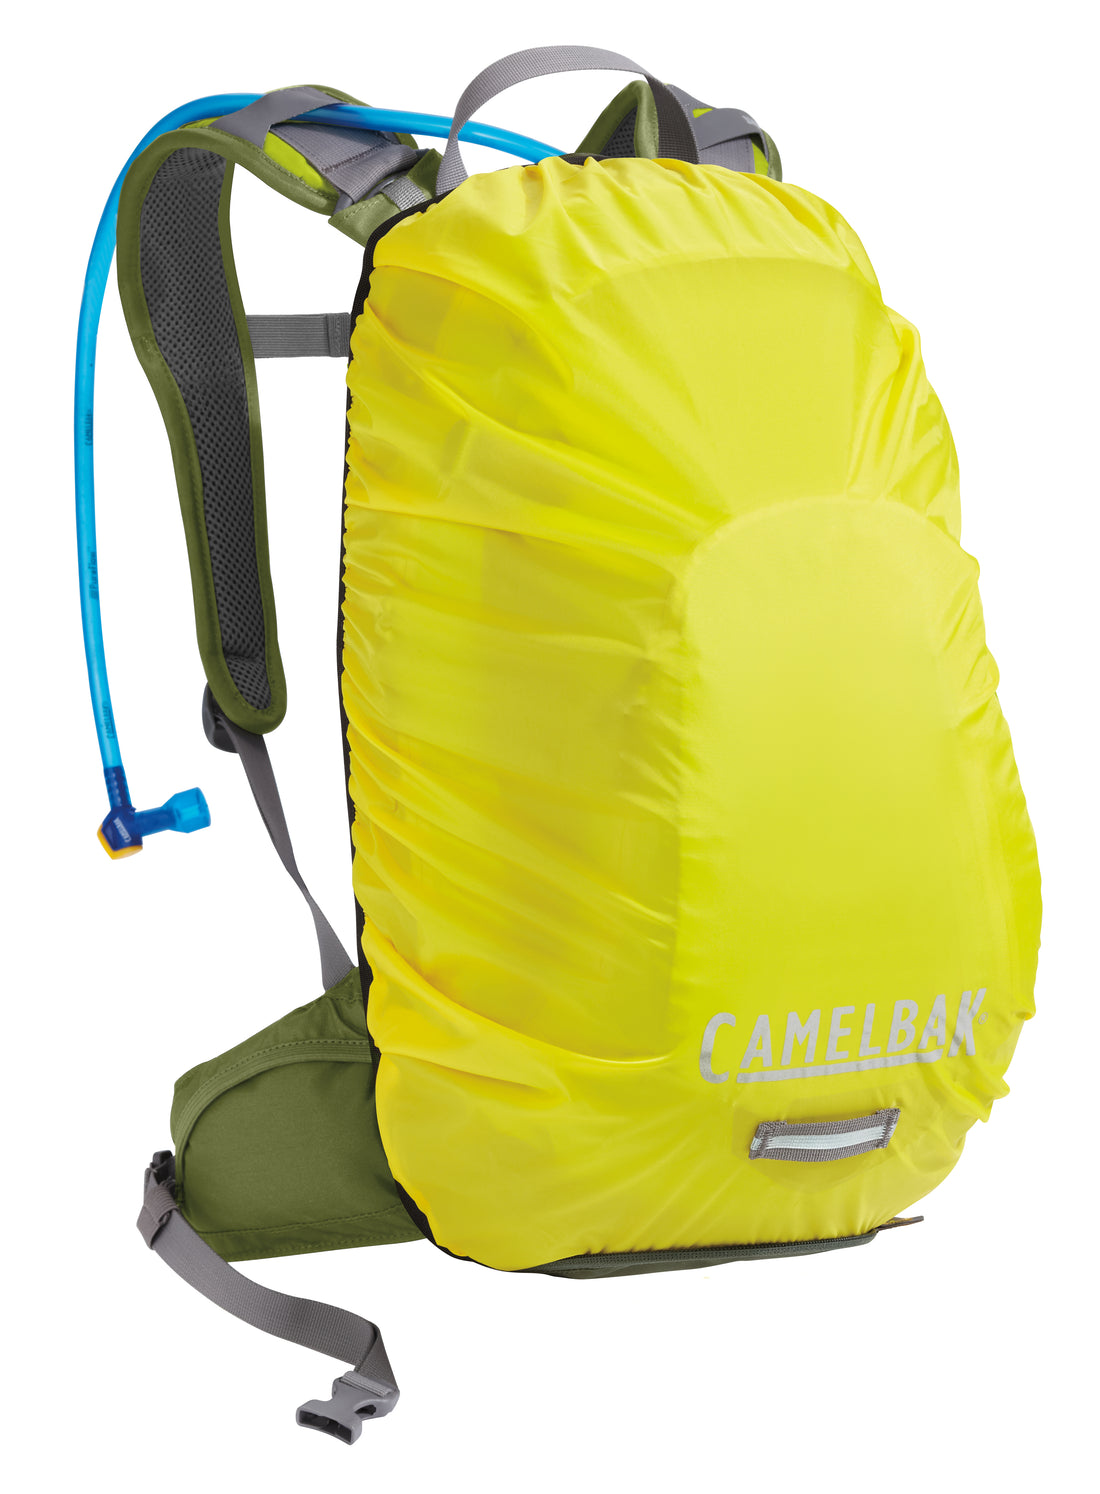 Camelbak|PACK_RAINCOVER|Cycle_LM